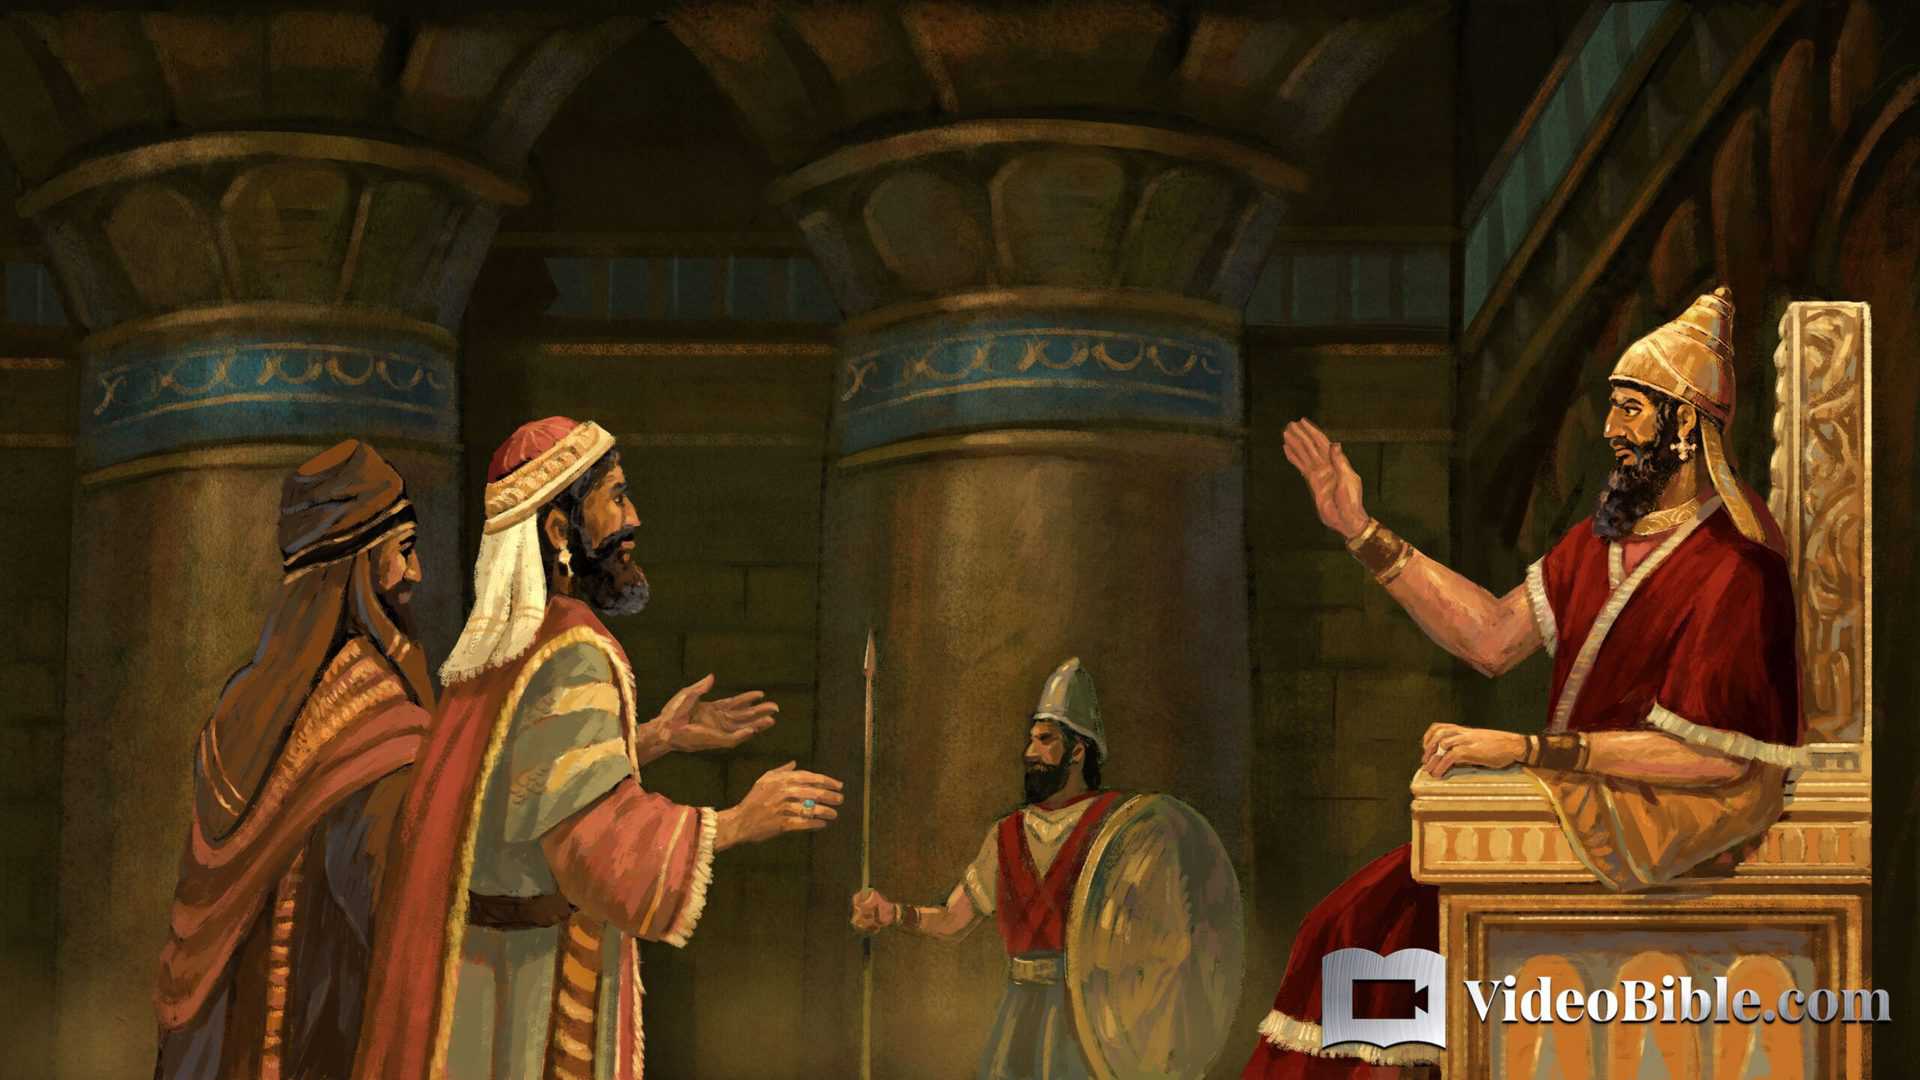 Babylonian king seated on throne greeted by emissaries